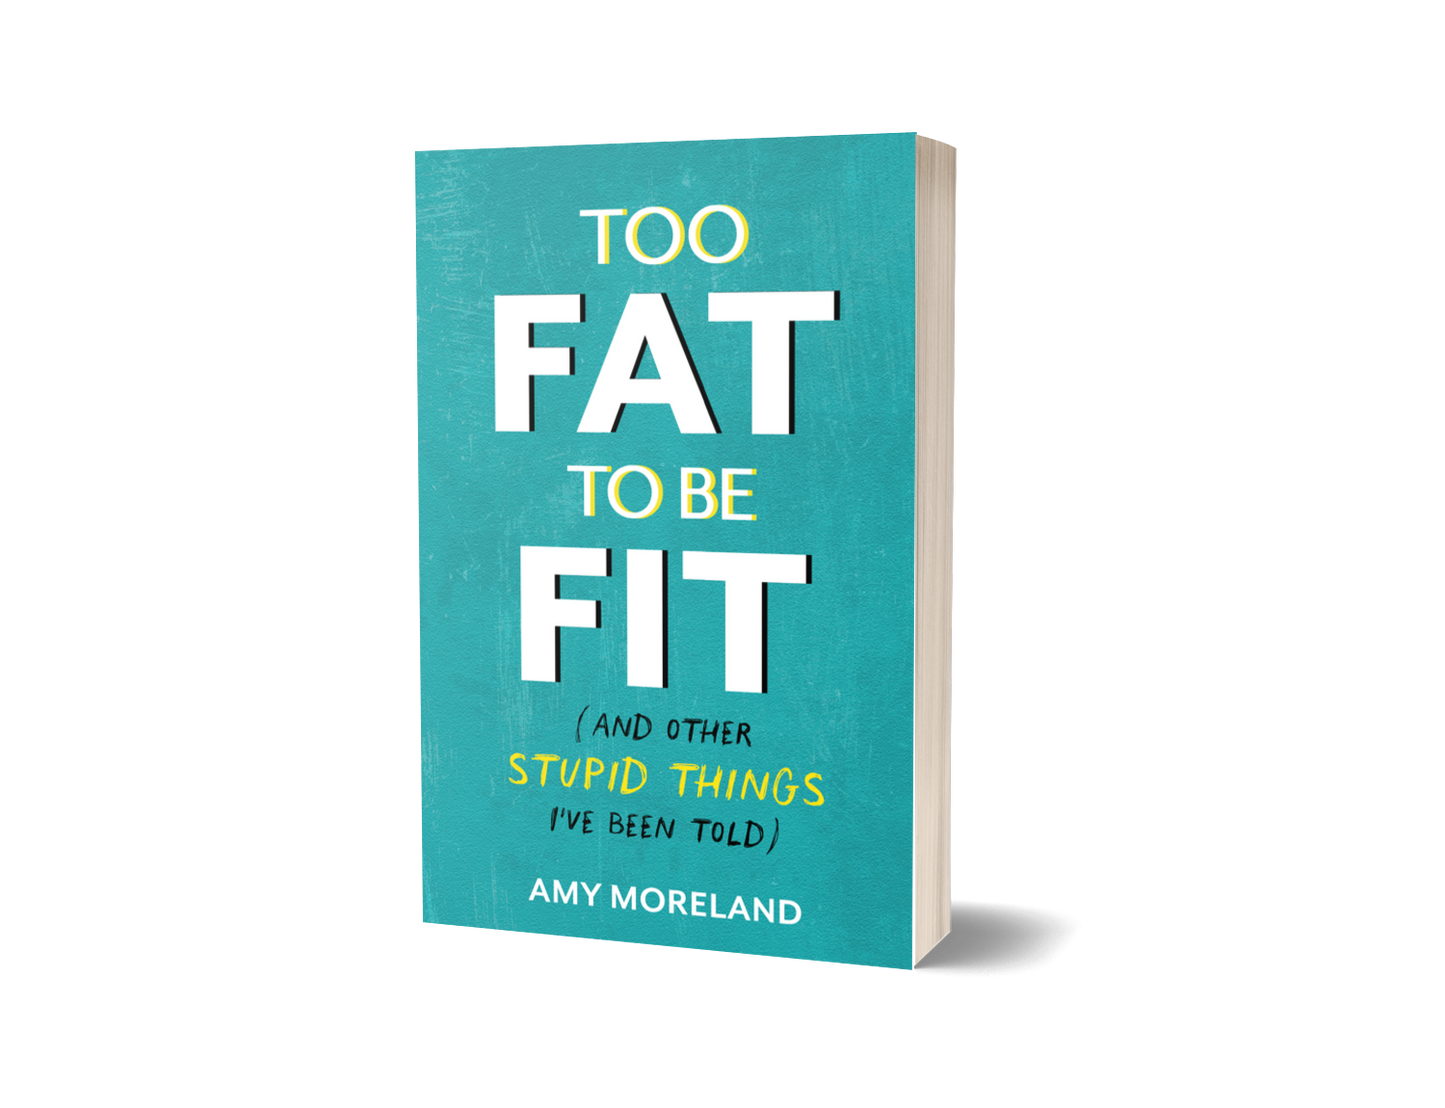 "Too Fat To Be Fit (And Other Stupid Things I've Been Told)"